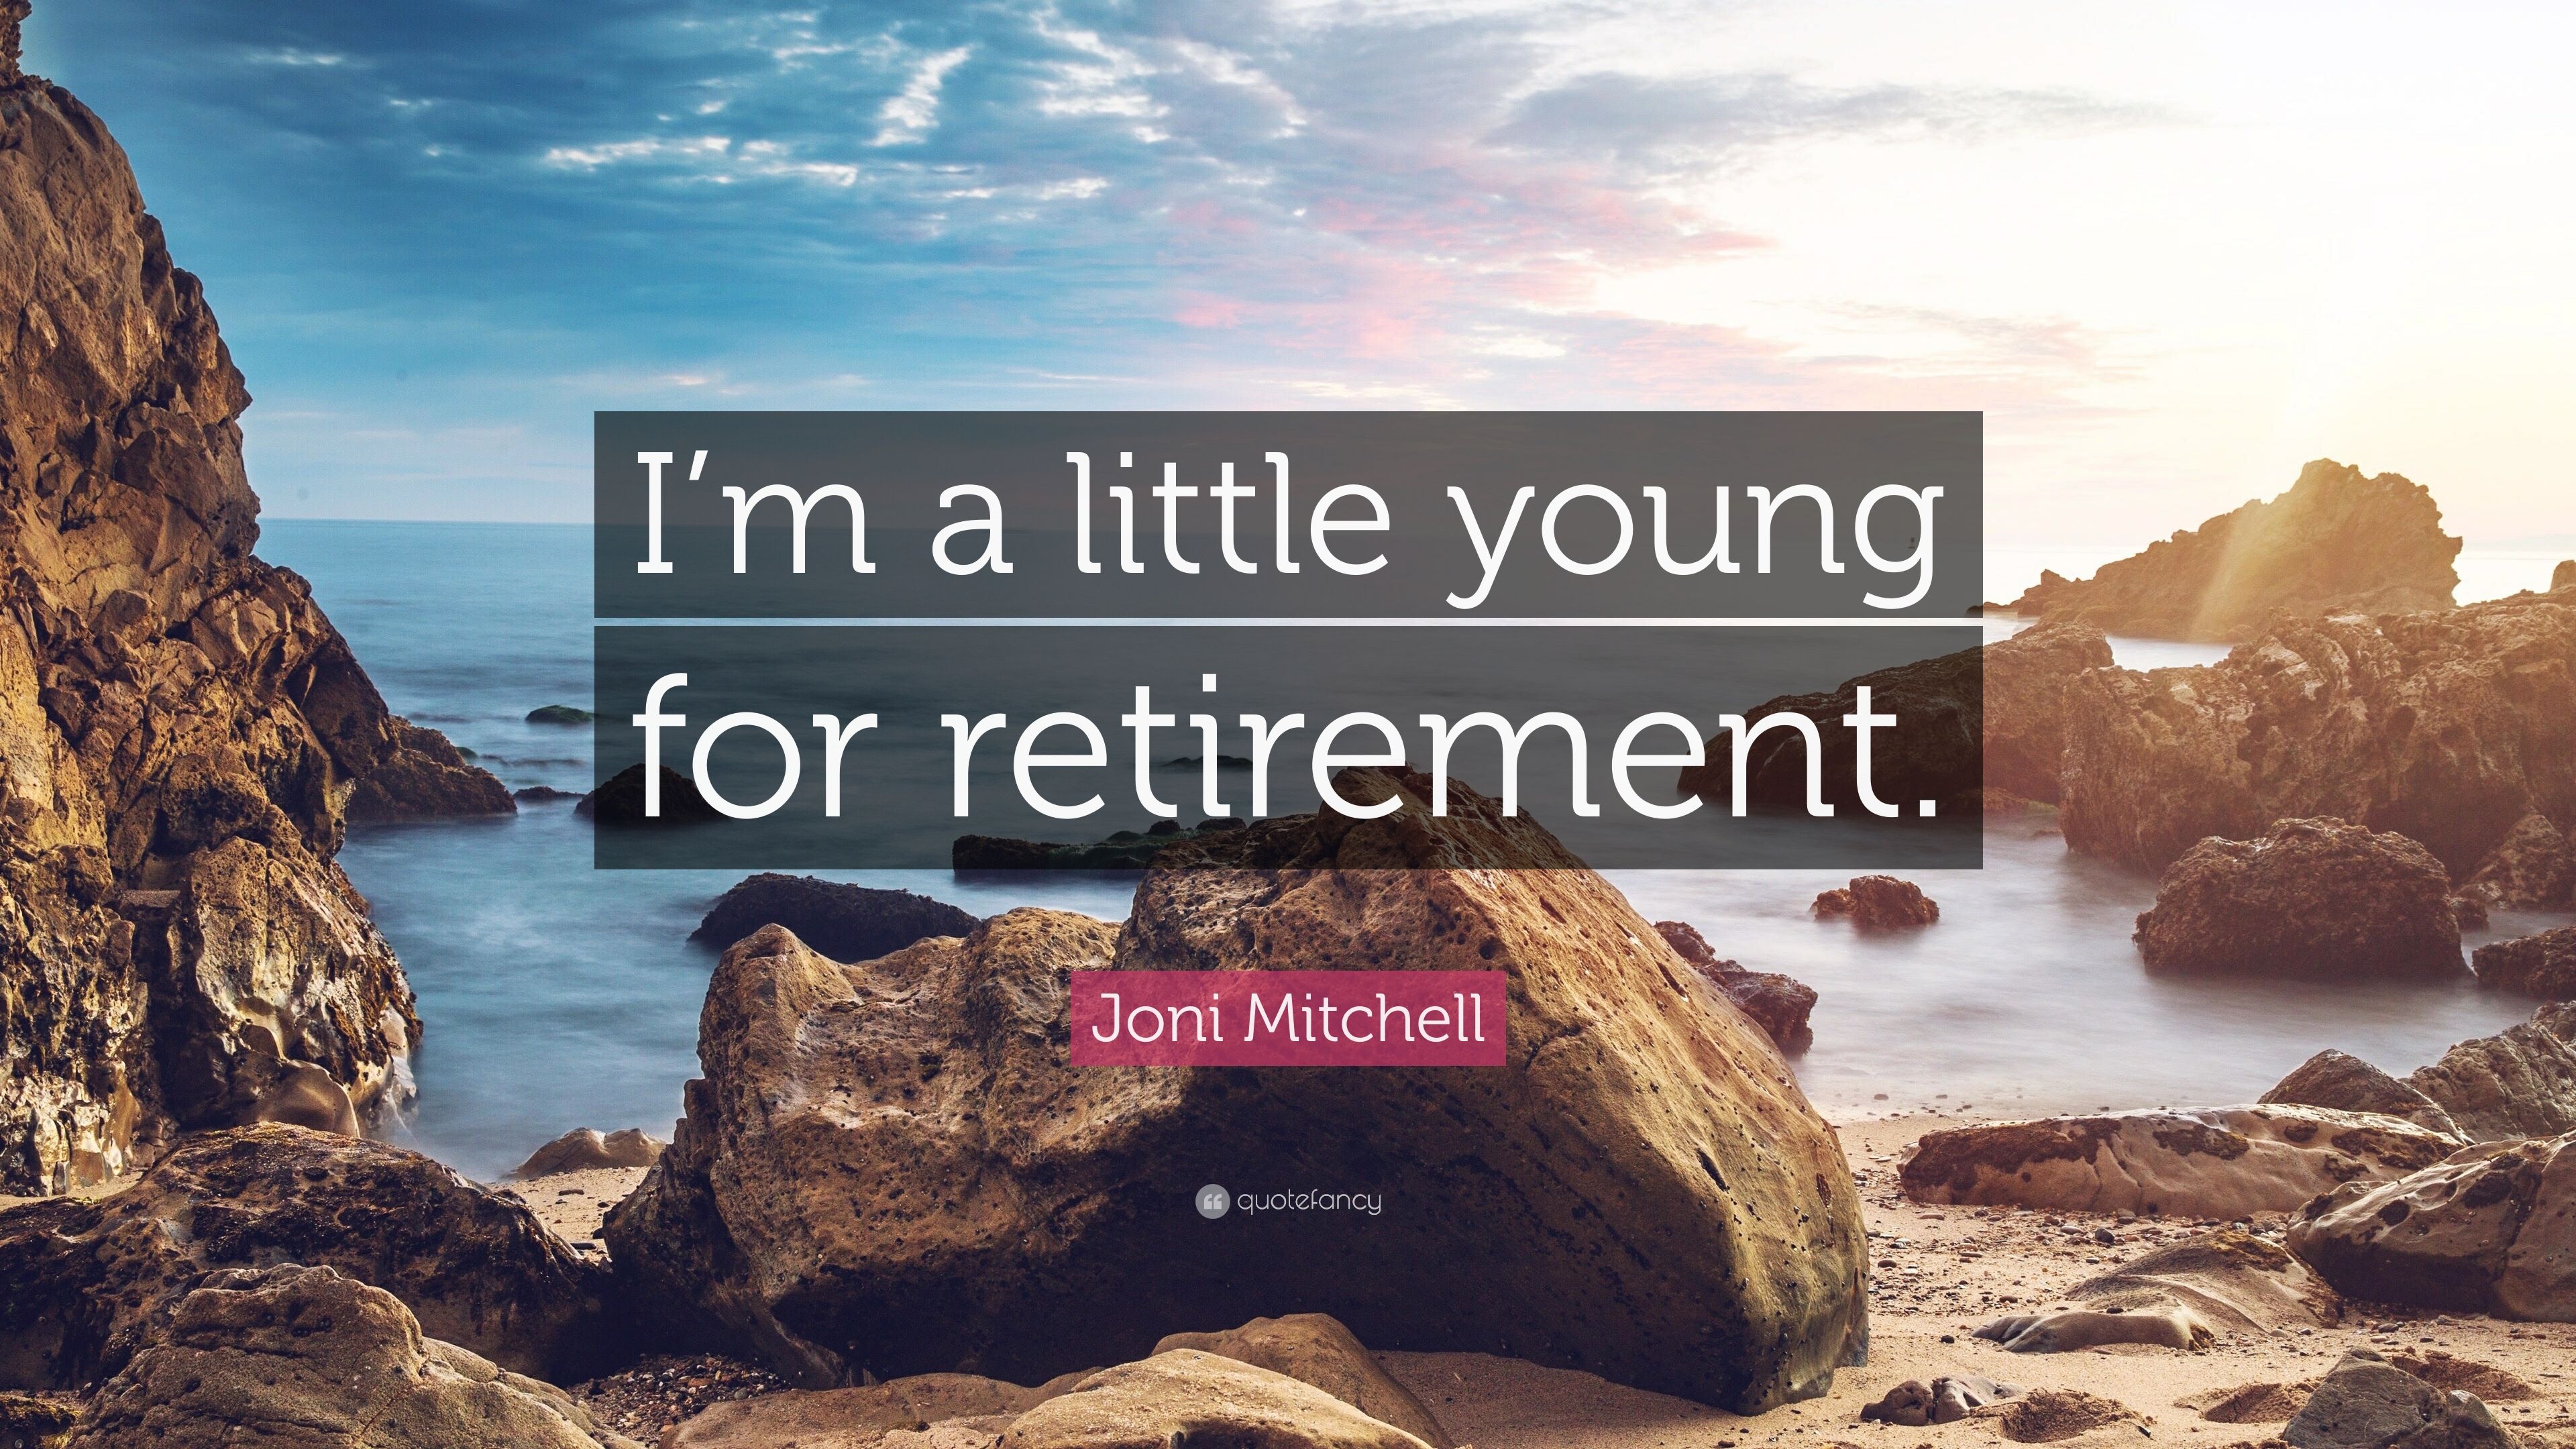 Joni Mitchell Quote: “I'm a little young for retirement.” 9